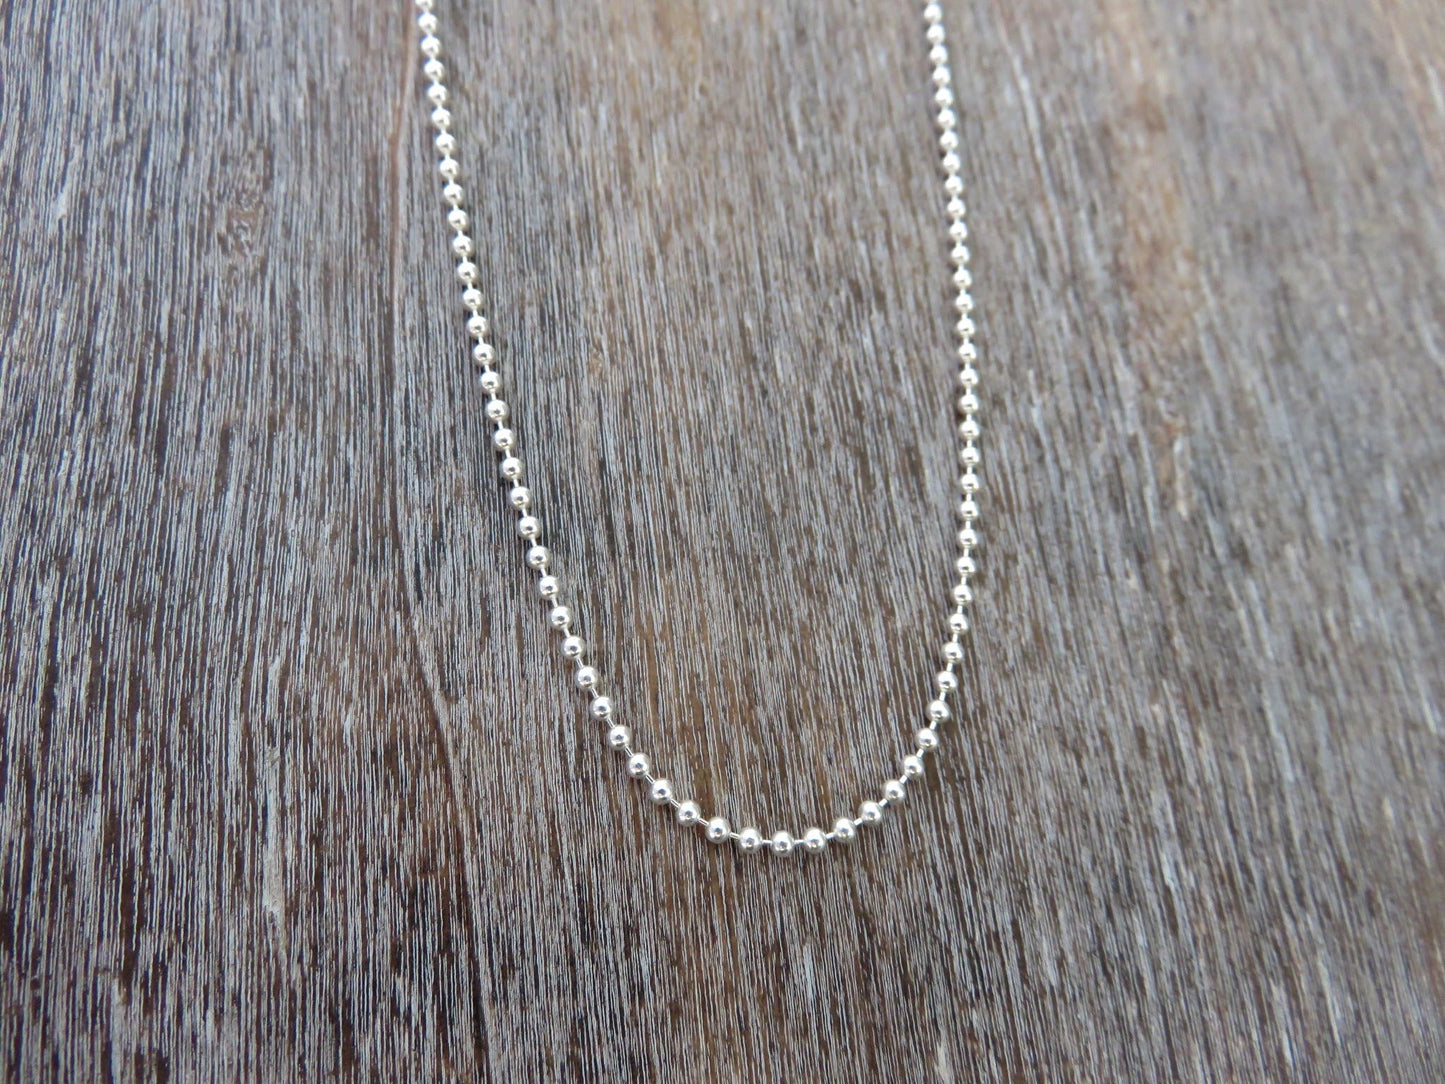 Silver ball chain in different lengths 